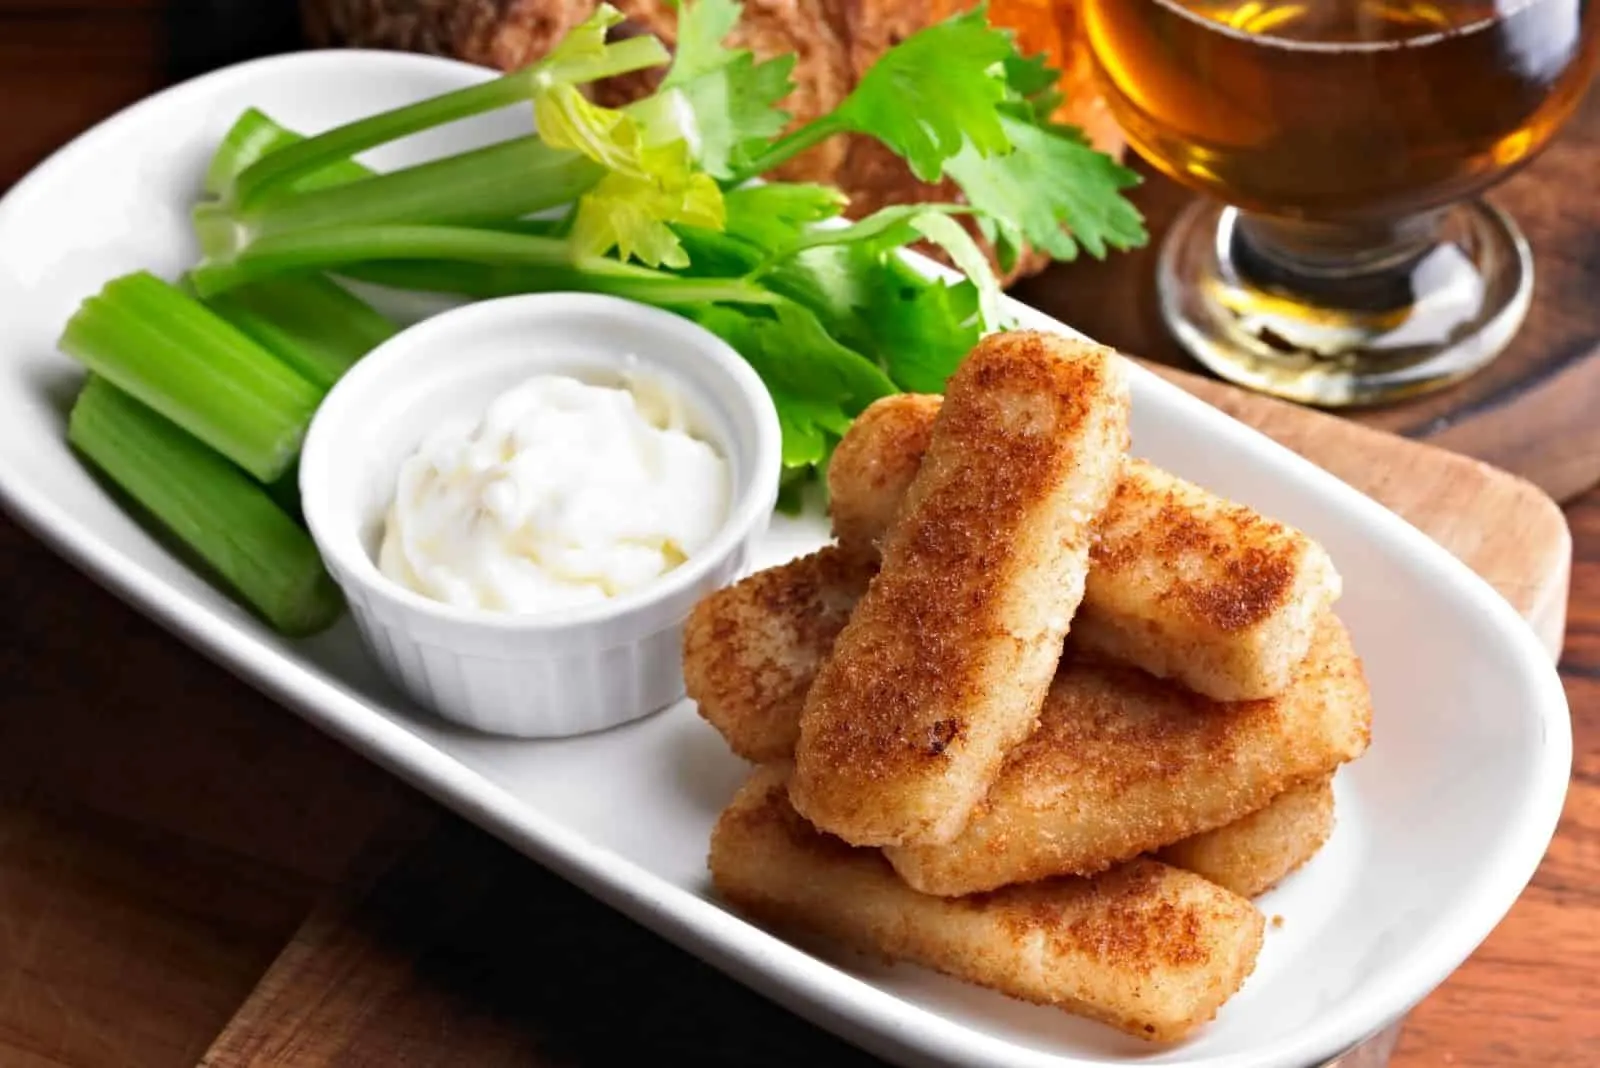 fish sticks with celery and mayo on plate with wine